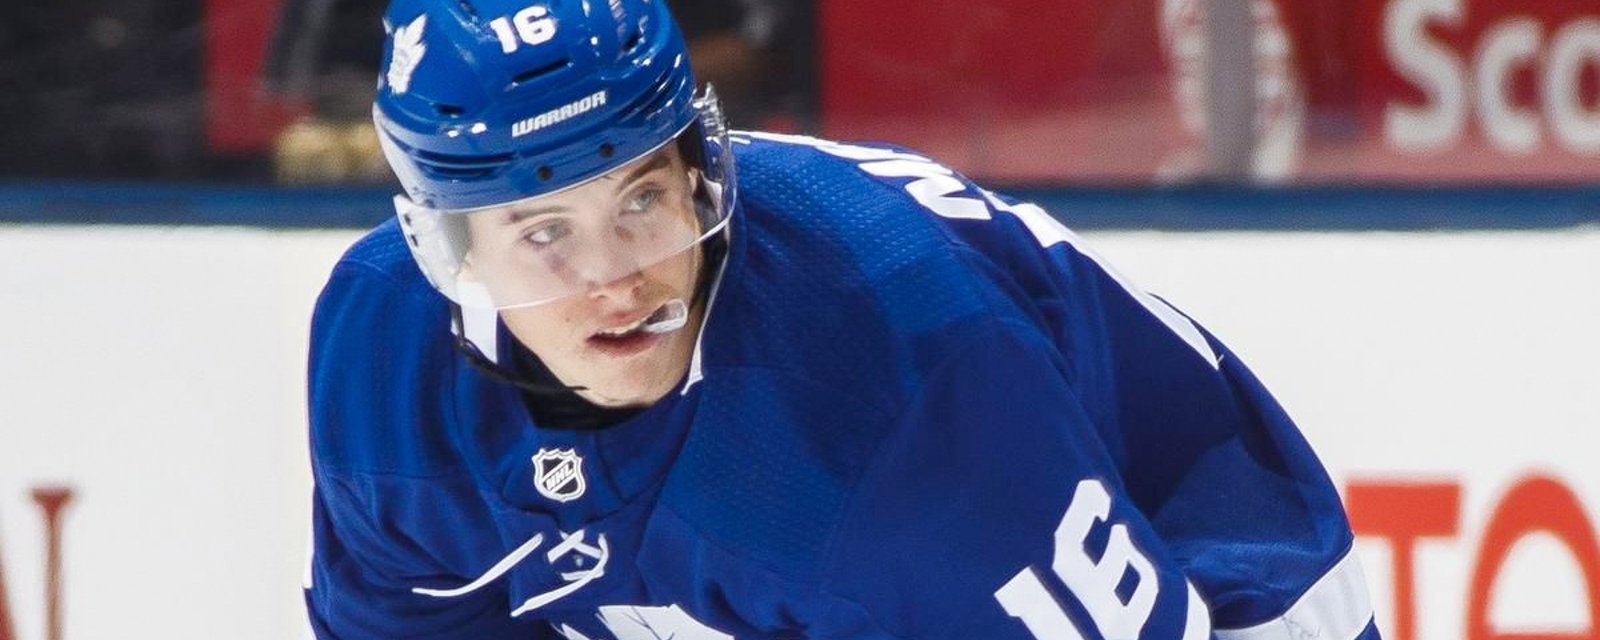 Report: Marner says he will not attend Leafs training camp